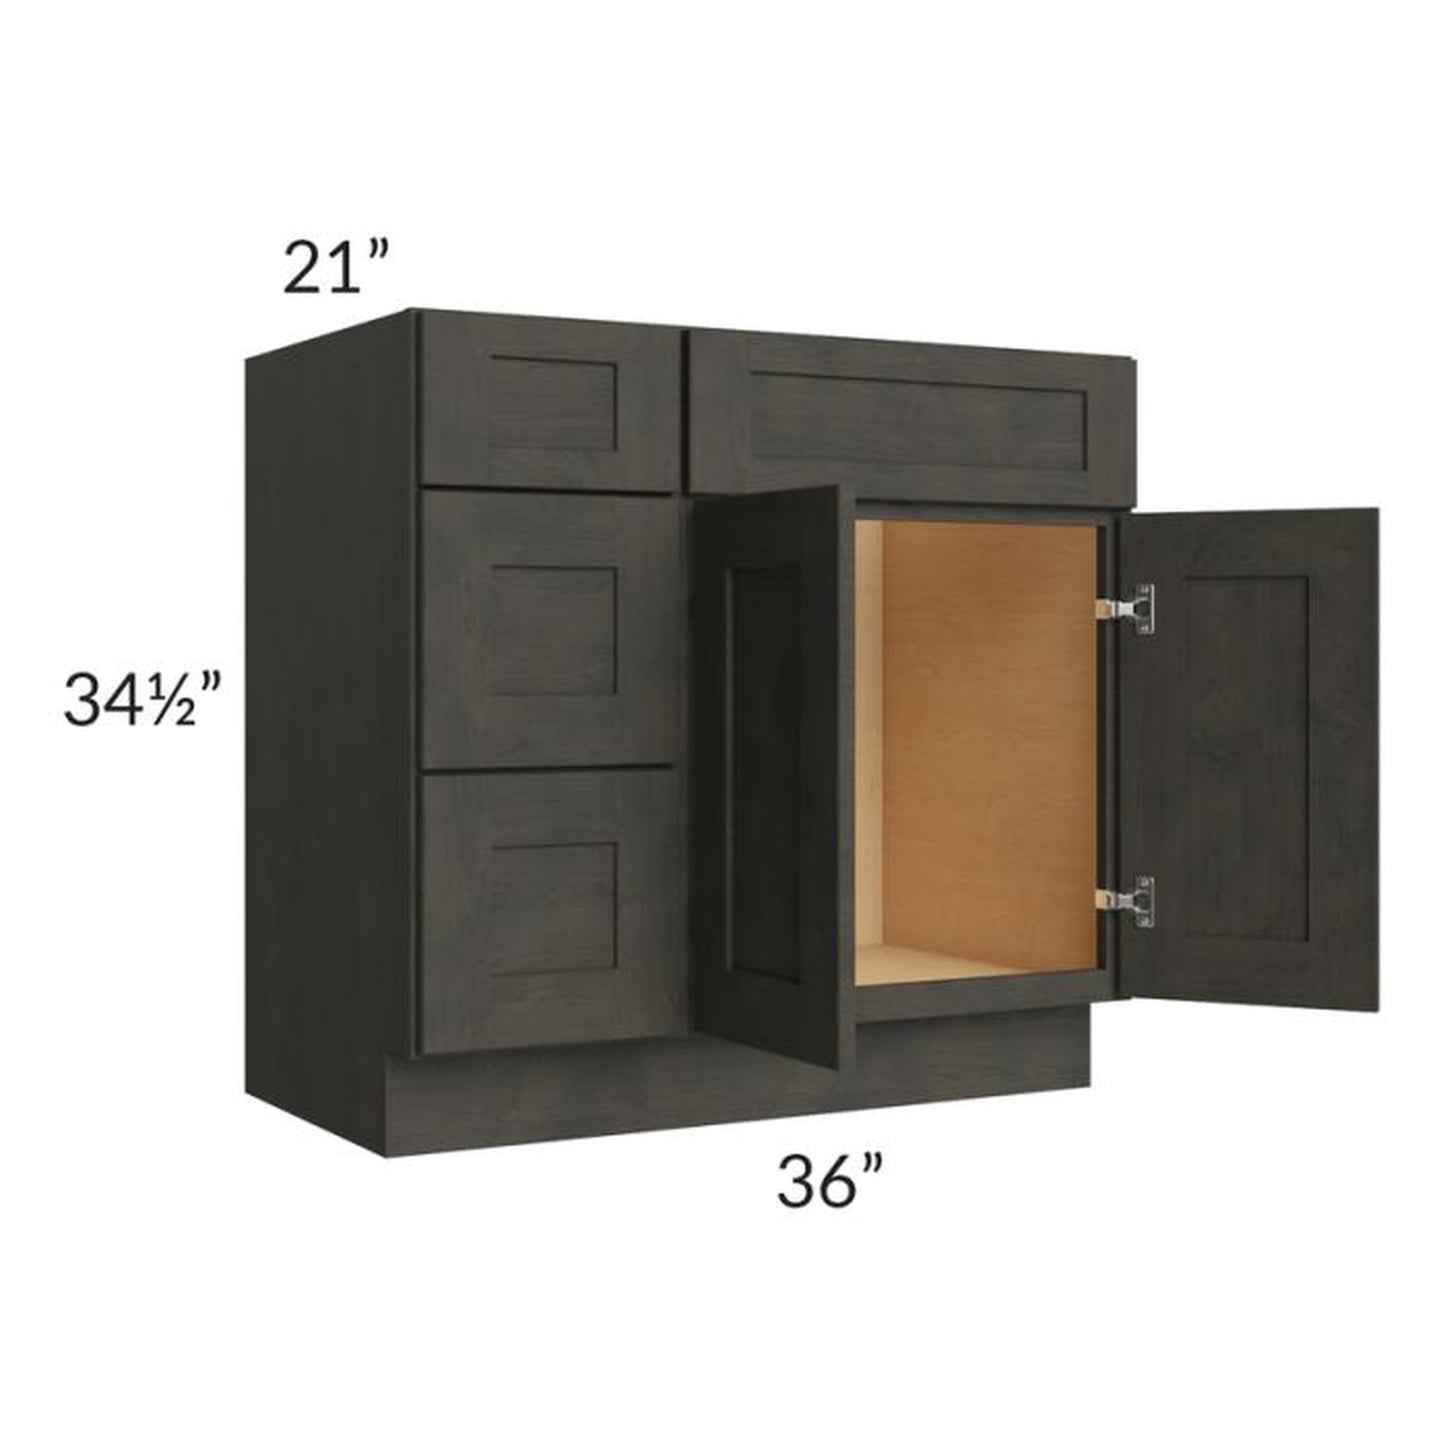 RTA Charcoal Grey Shaker 36" Vanity Base Cabinet (Drawers on Left) with 1 Decorative End Panel